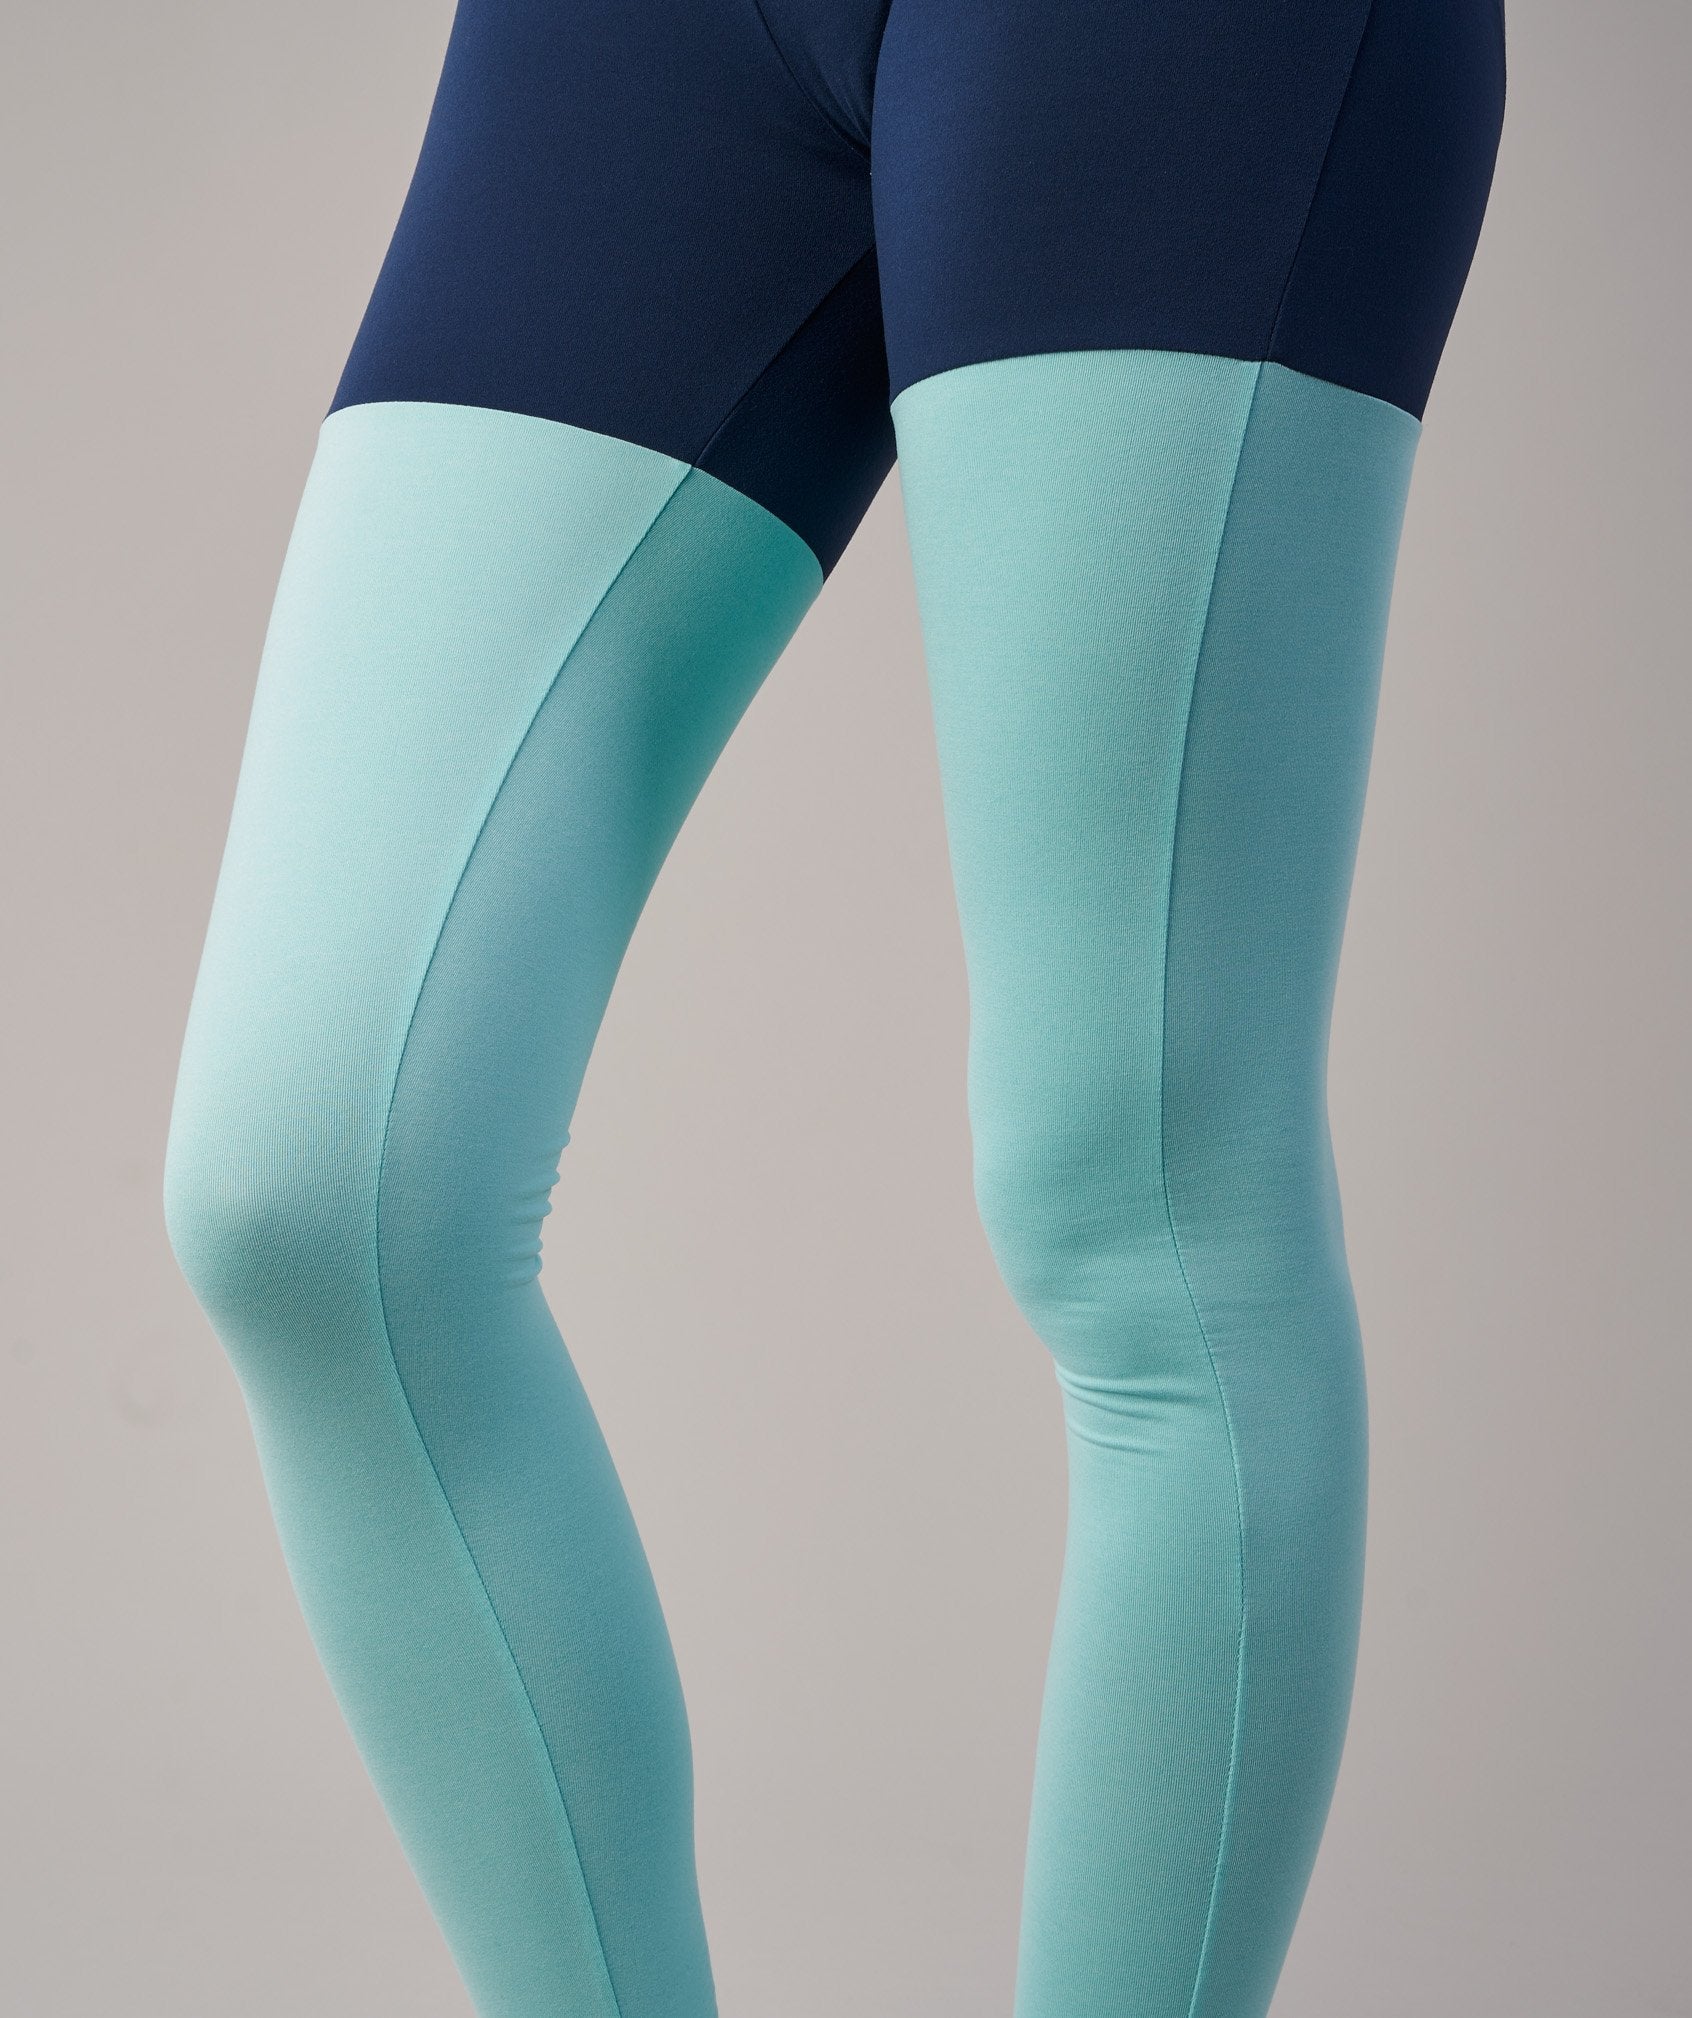 TwoTone Leggings in Sapphire Blue Marl/Pale Turquoise Marl - view 6